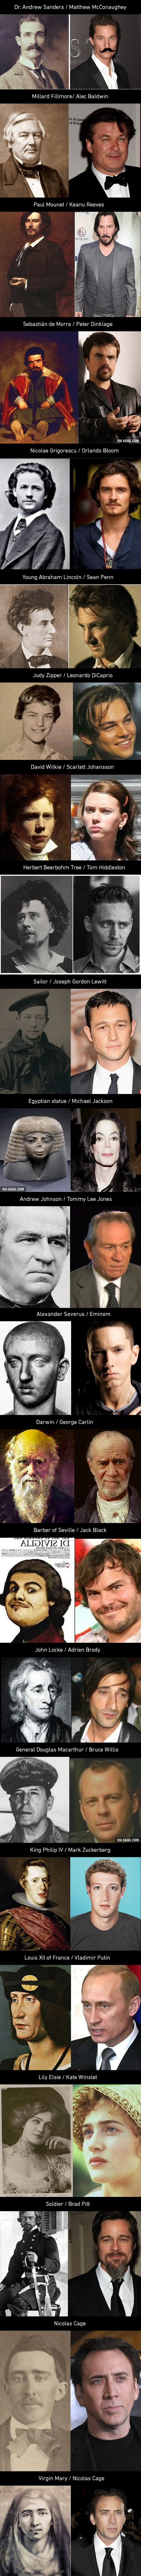 22 Celebrities And Their Historical Twins